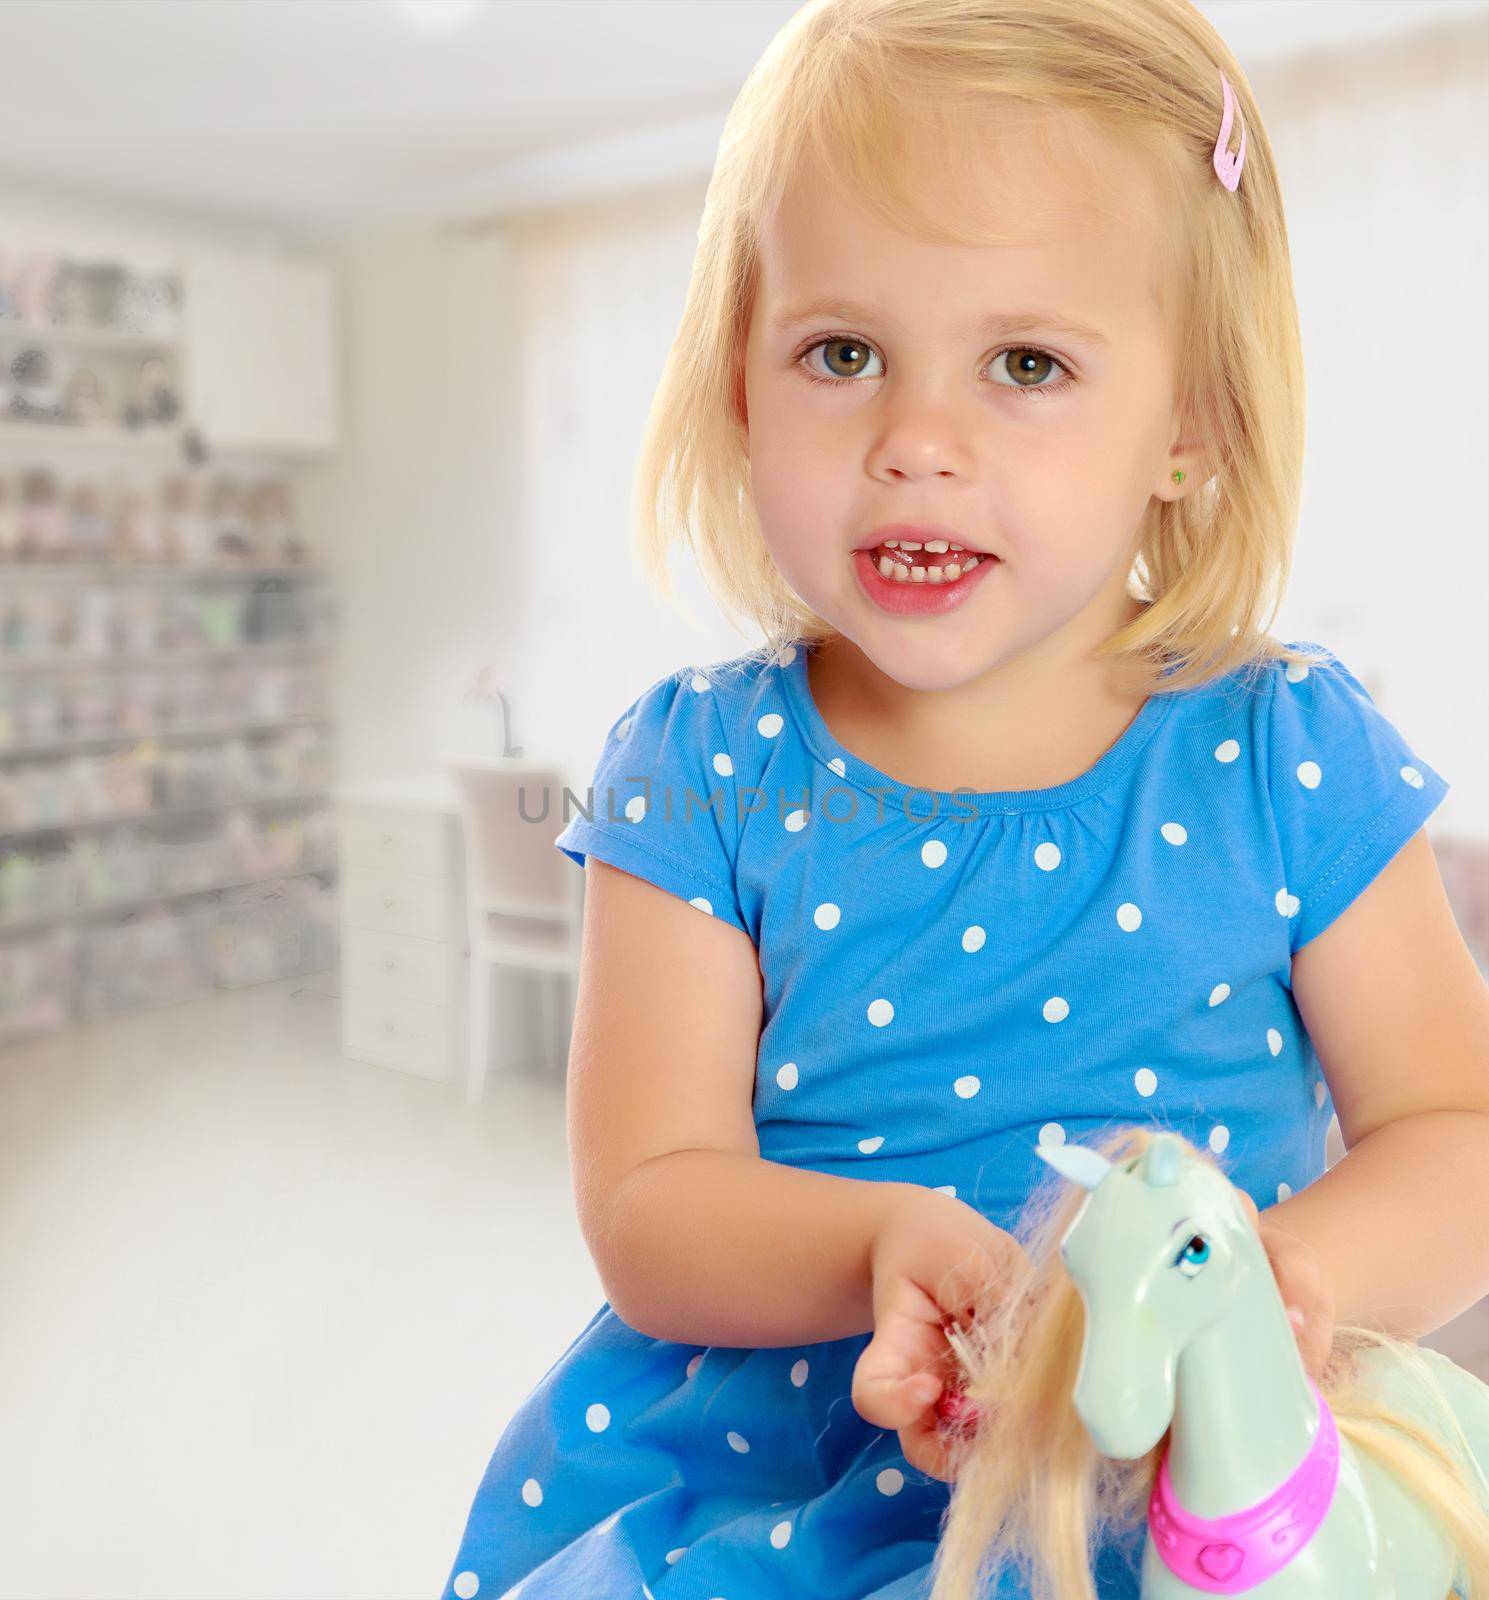 Cute little blonde girl playing with a toy horse. Girl wearing a blue dress with polka dots.On the background of the room where children live, and are on the shelves of toys.